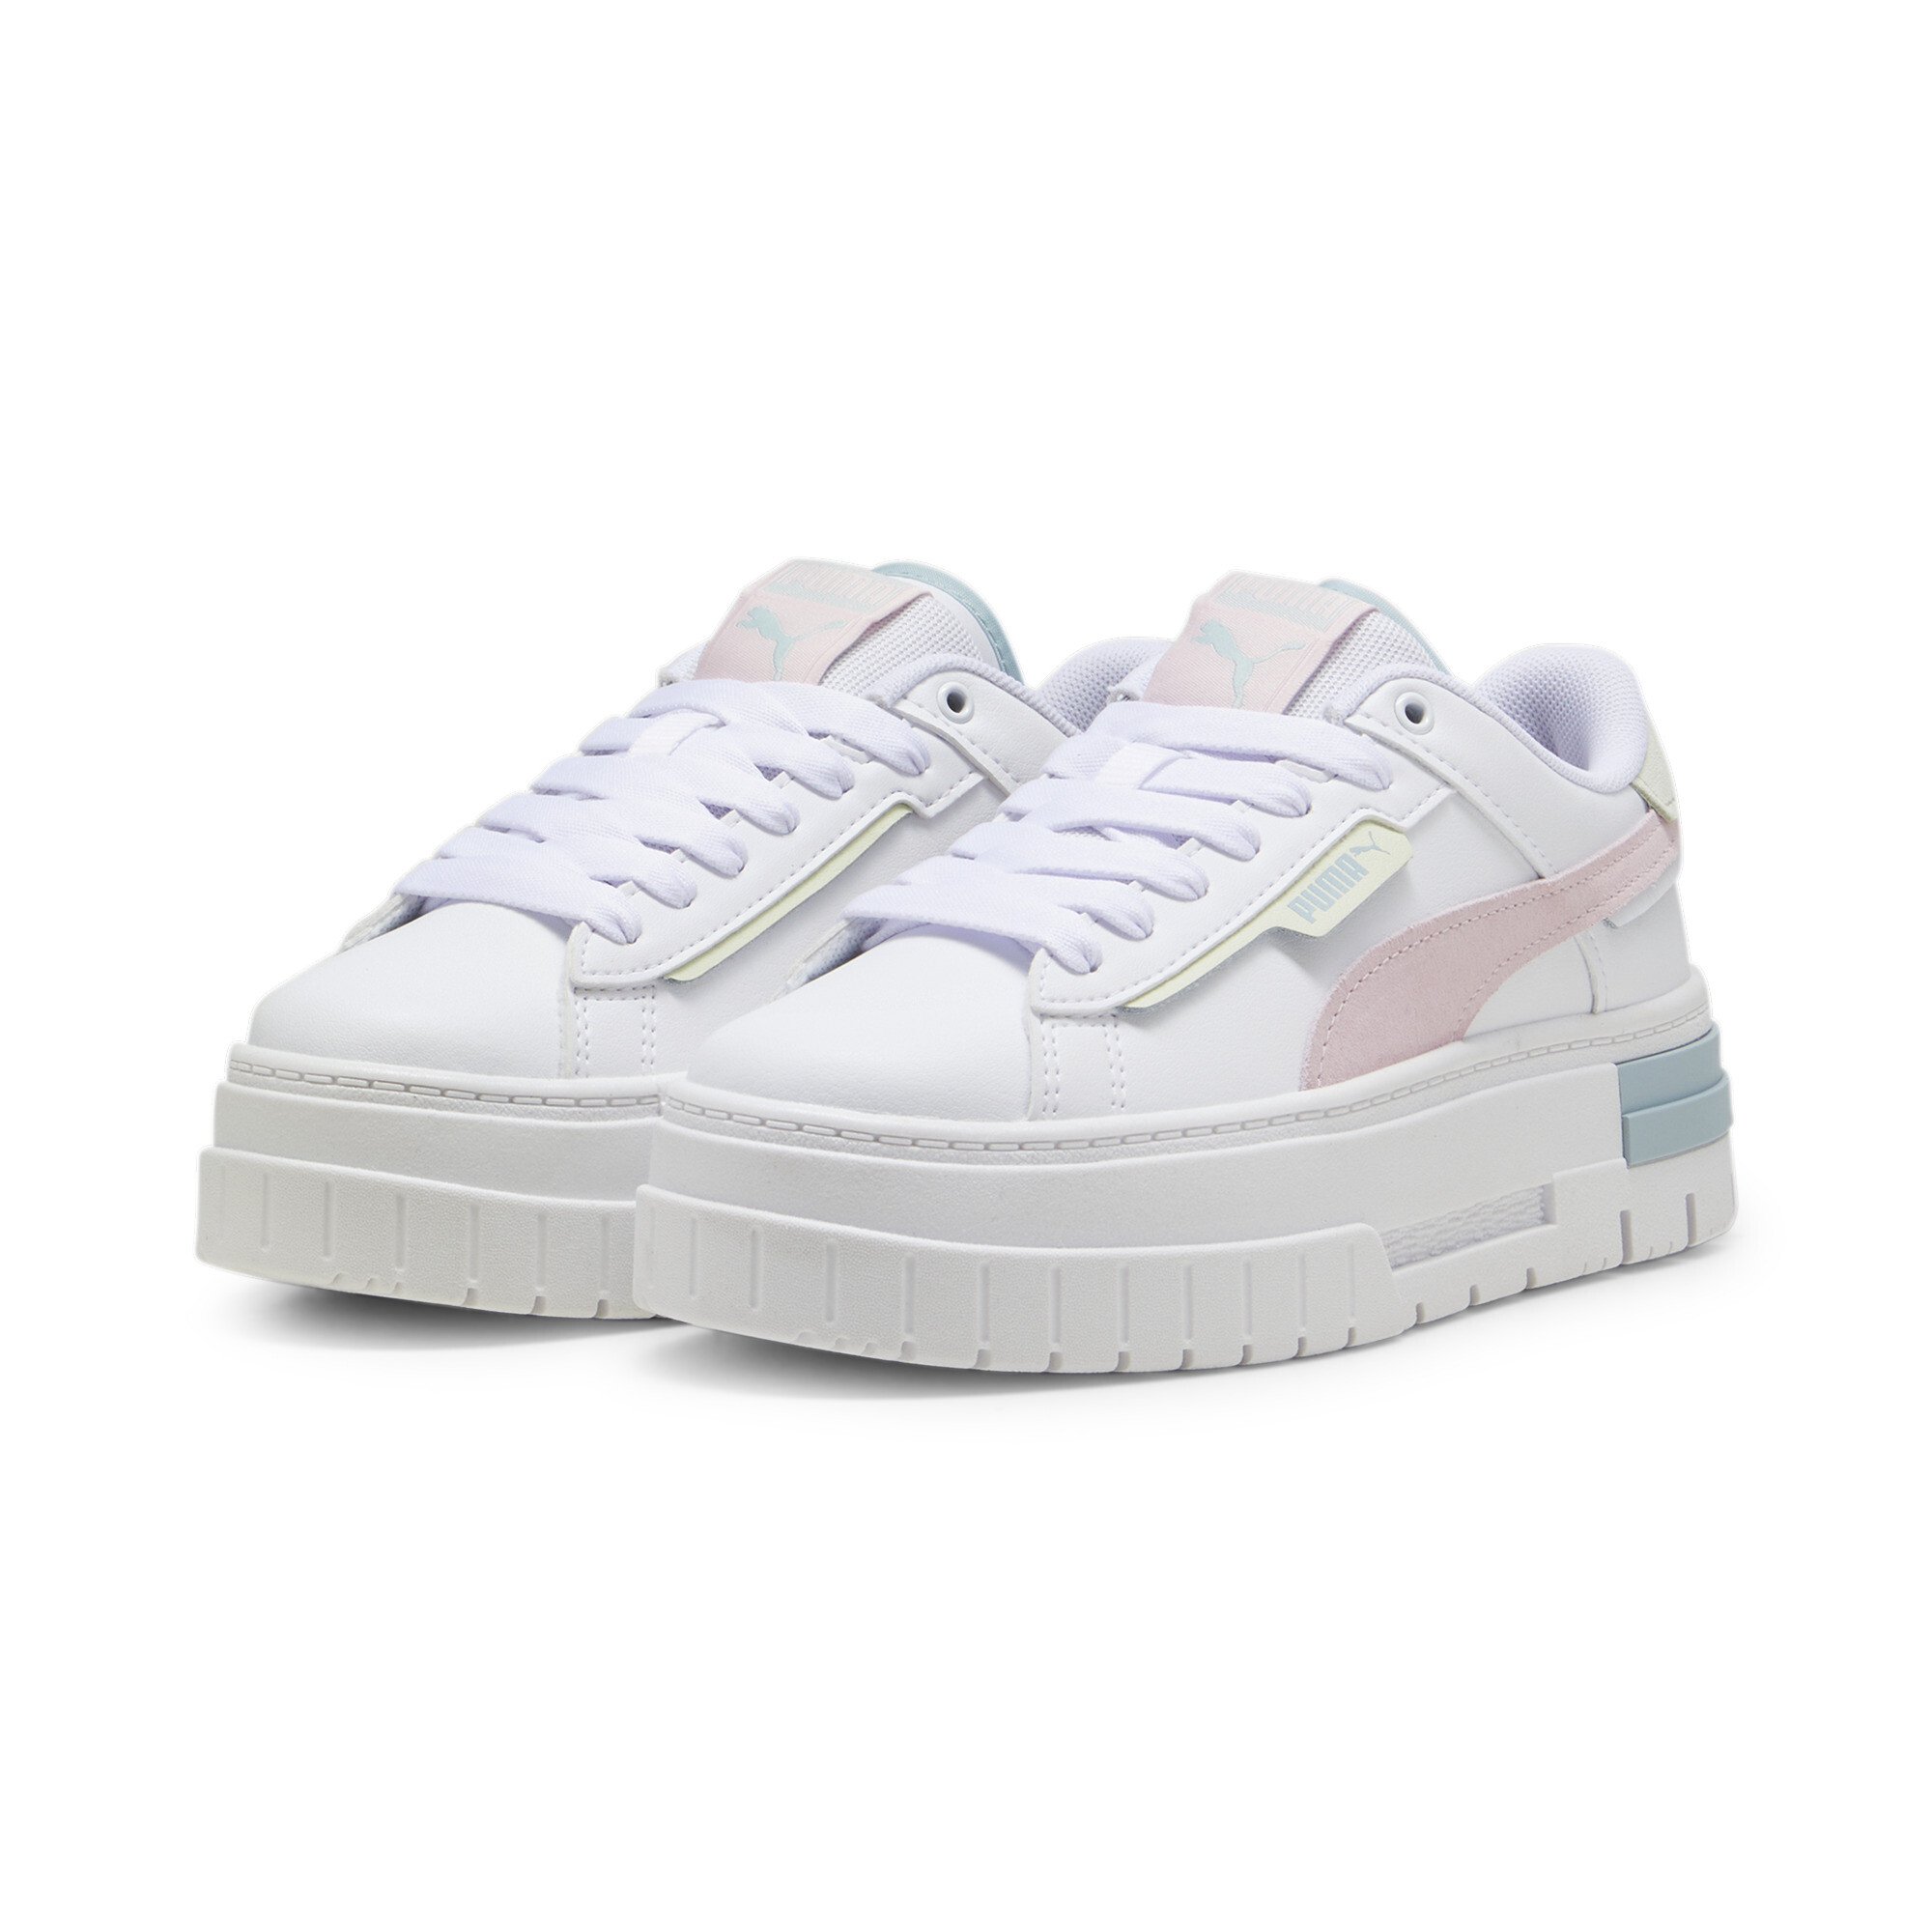 Women's Puma Mayze Crashed Youth Sneakers, White, Size 38.5, Shoes